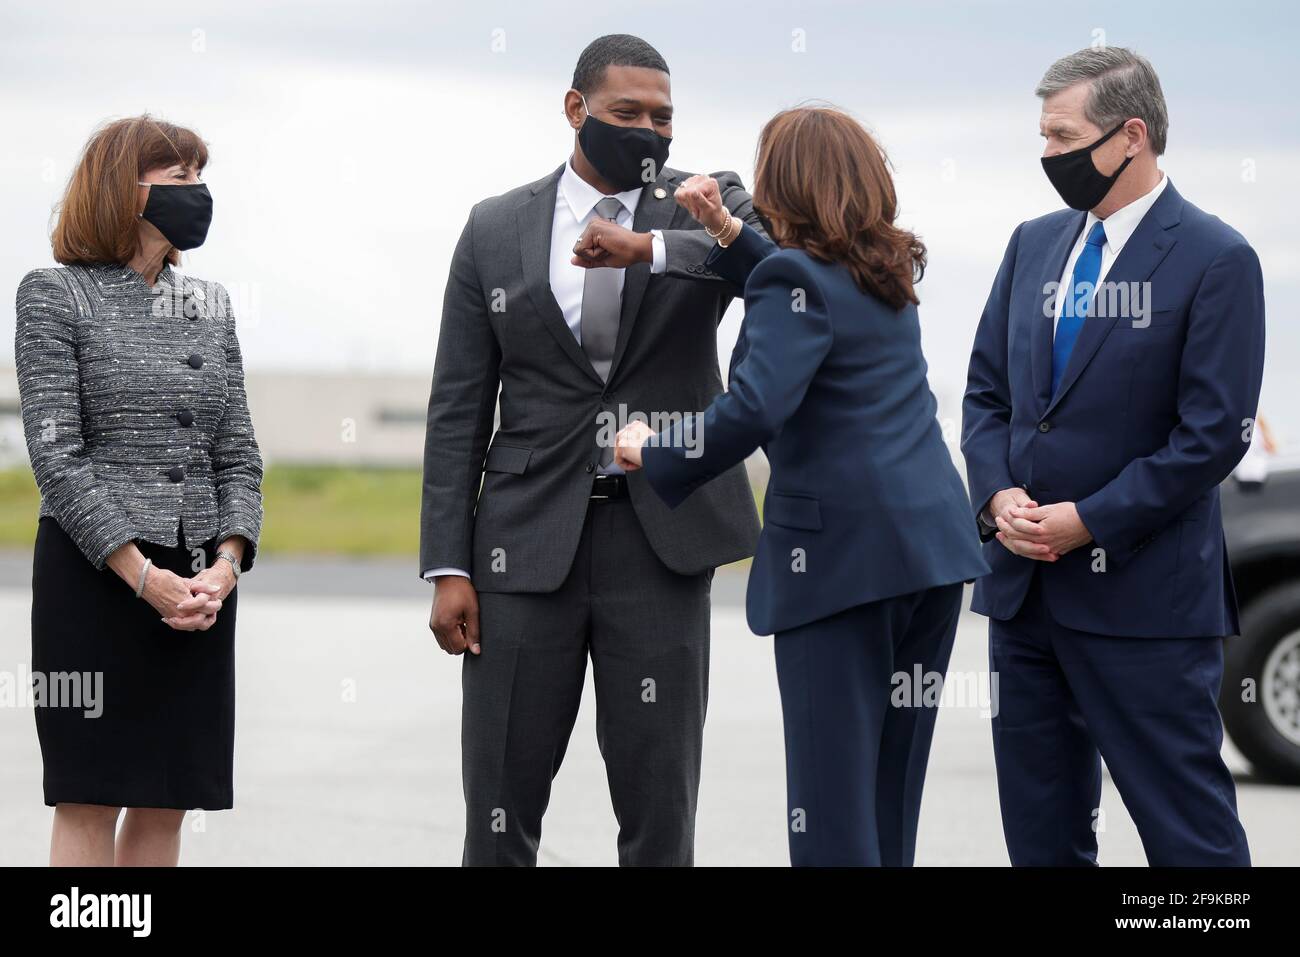 U.S. Vice President Kamala Harris elbow bumps with EPA administrator Michael Reagan next to North Carolina Governor Roy Cooper and Rep. Kathy Manning (D-NC) at Piedmont Triad International Airport in Greensboro, North Carolina, U.S. April 19, 2021. REUTERS/Tom Brenner Stock Photo